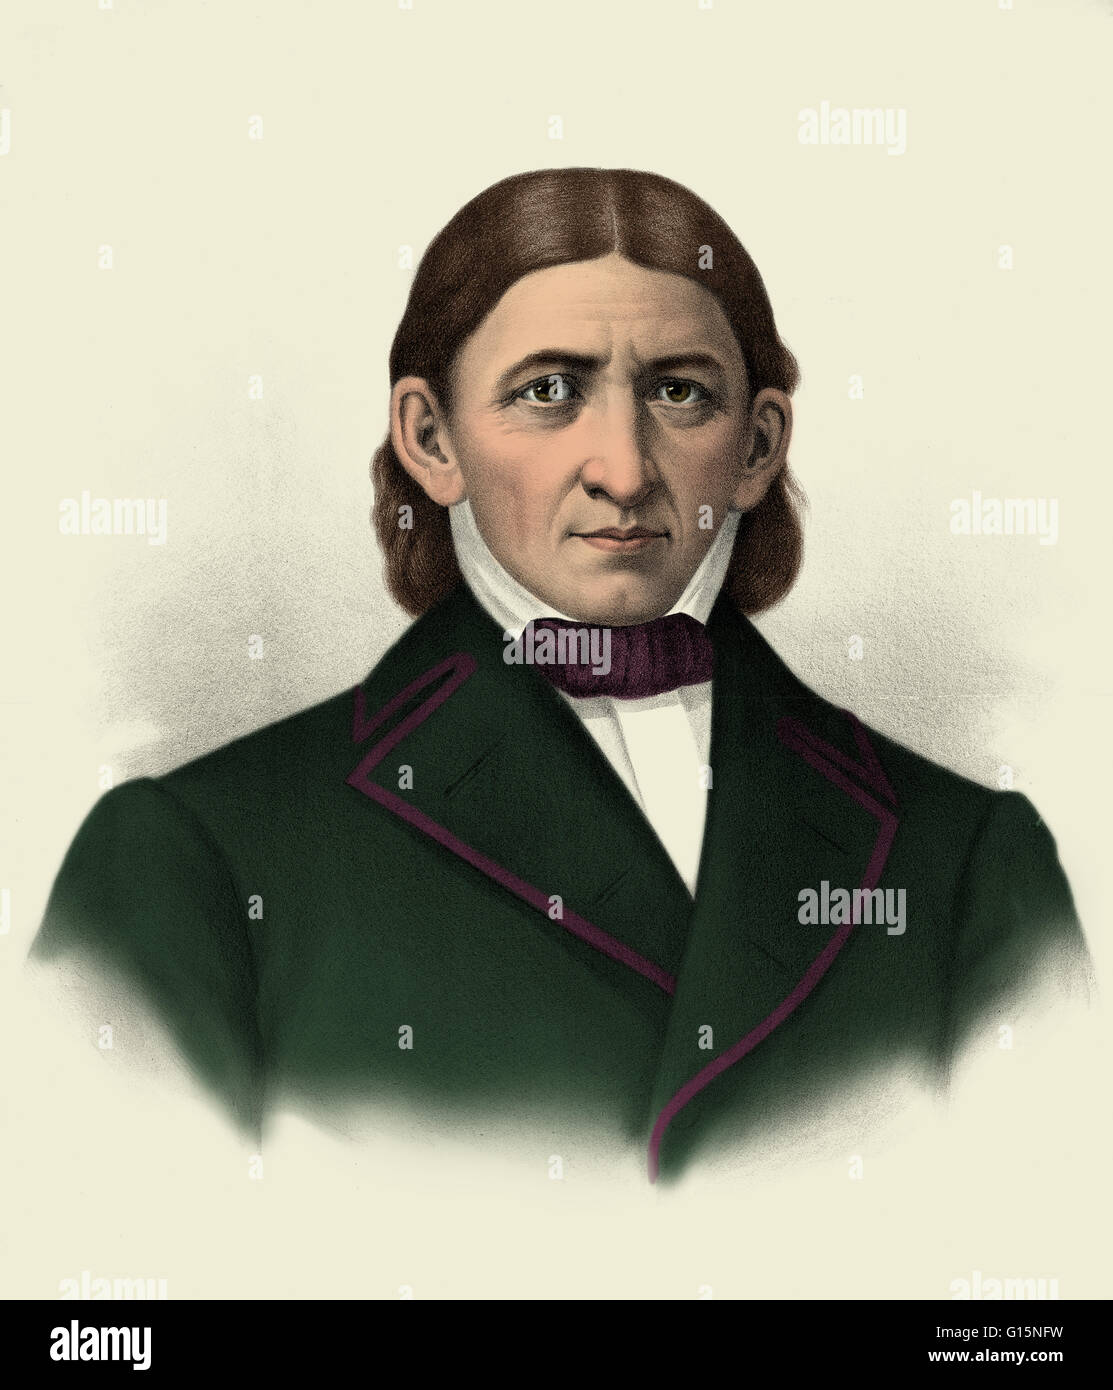 Color-enhanced portrait of Friedrich Wilhelm August Fröbel (April 21, 1782 - June 21, 1852) was a German pedagogue, a student of Pestalozzi who laid the foundation for modern education based on the recognition that children have unique needs and capabilit Stock Photo